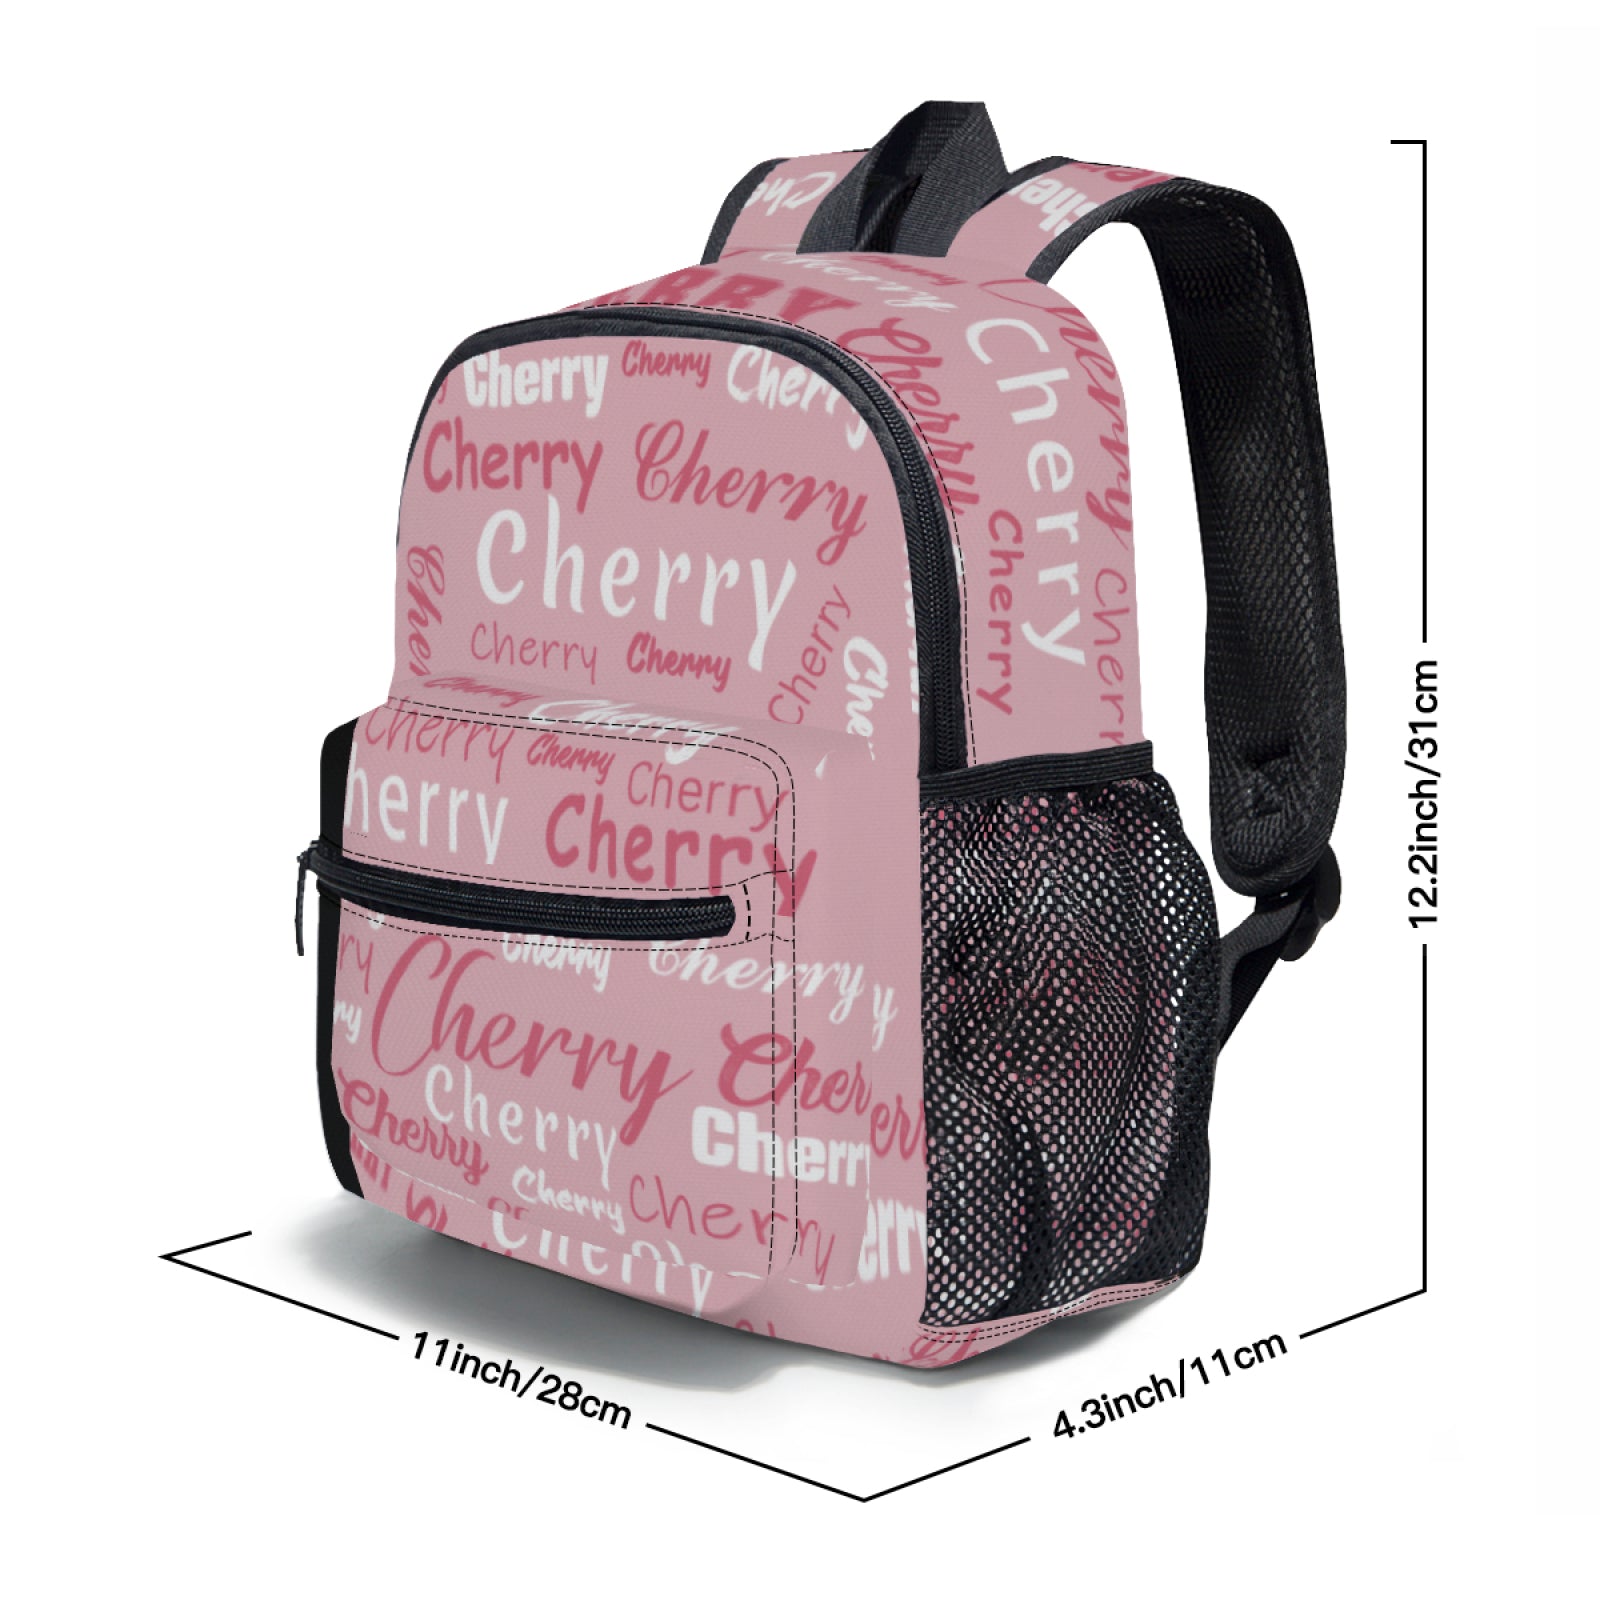 Personalized Name Backpack For Family Kids Friends,Customized Daypack Schoolbag for Kids Students Bookbag, Back to School Gifts